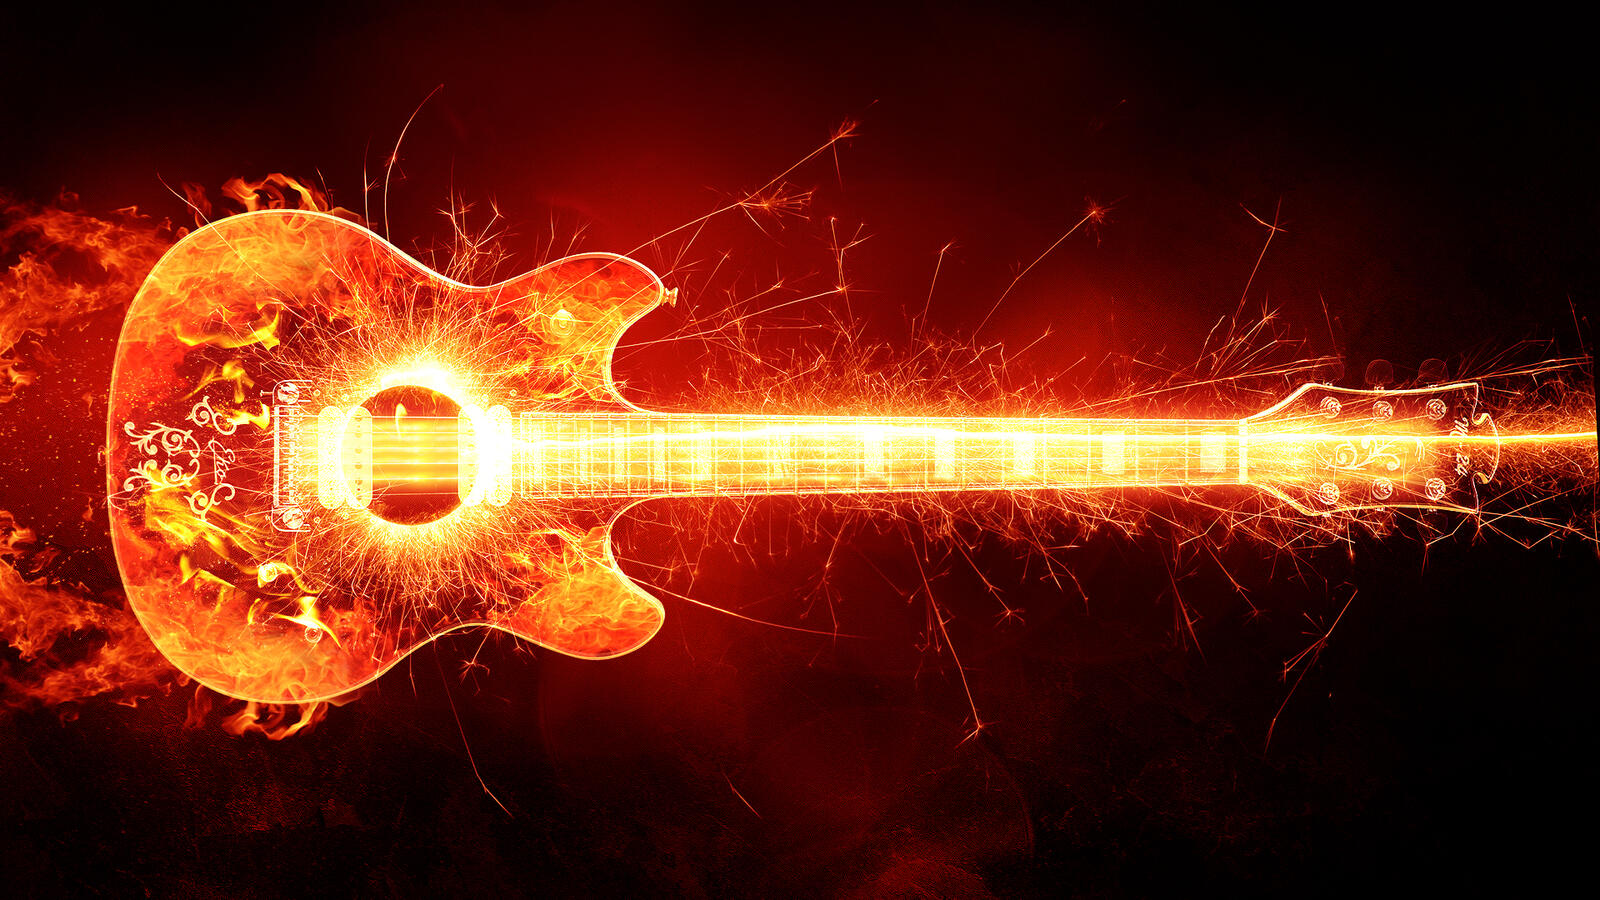 Wallpapers guitar flame creative on the desktop